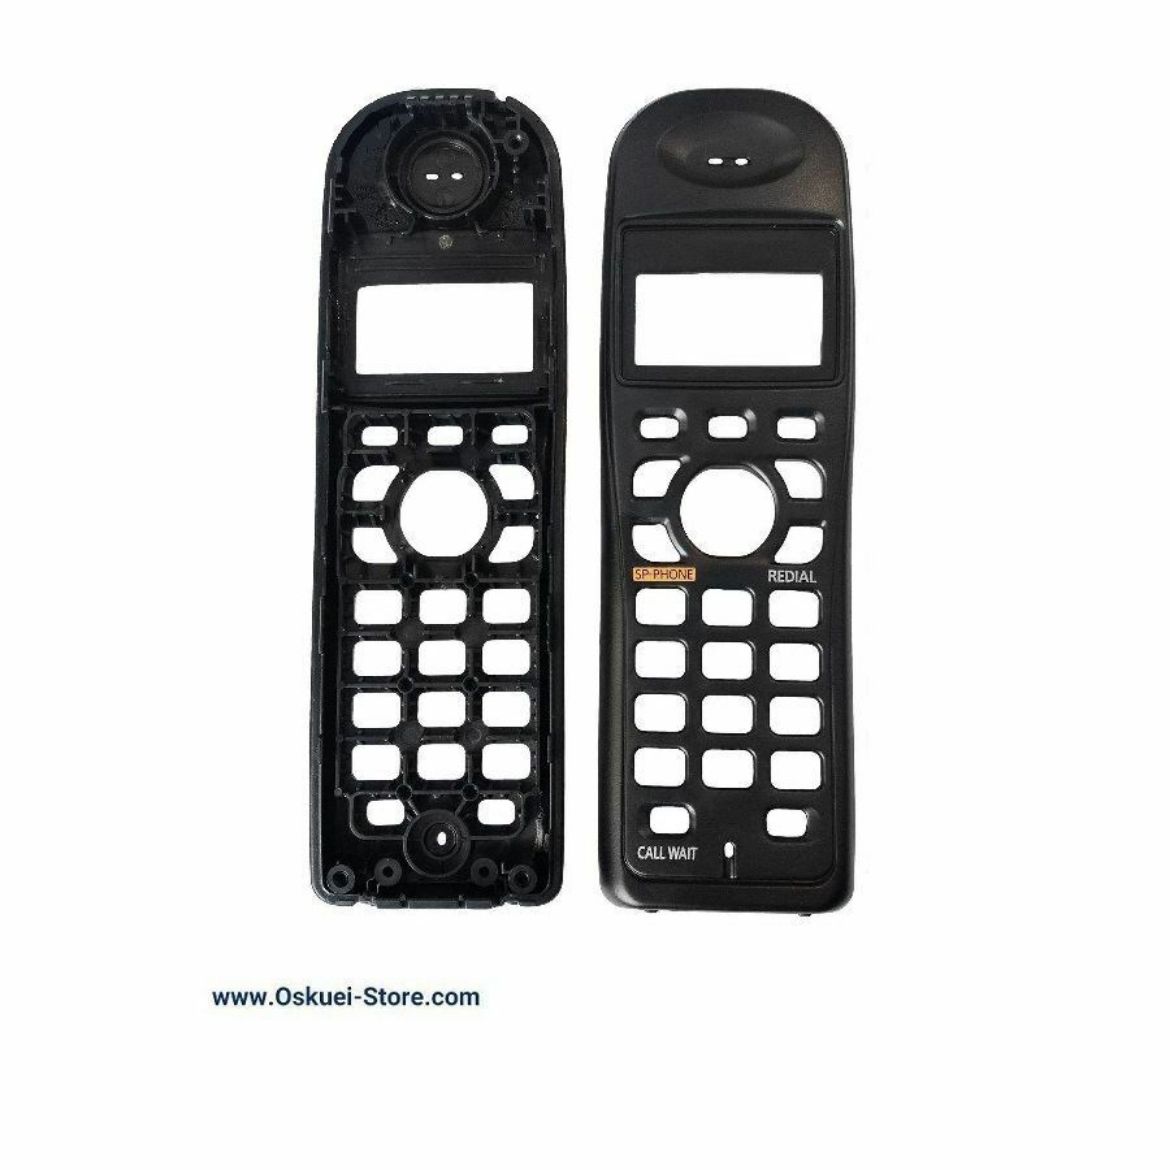 Panasonic KX-TG3611 Outer Casing Front and Back